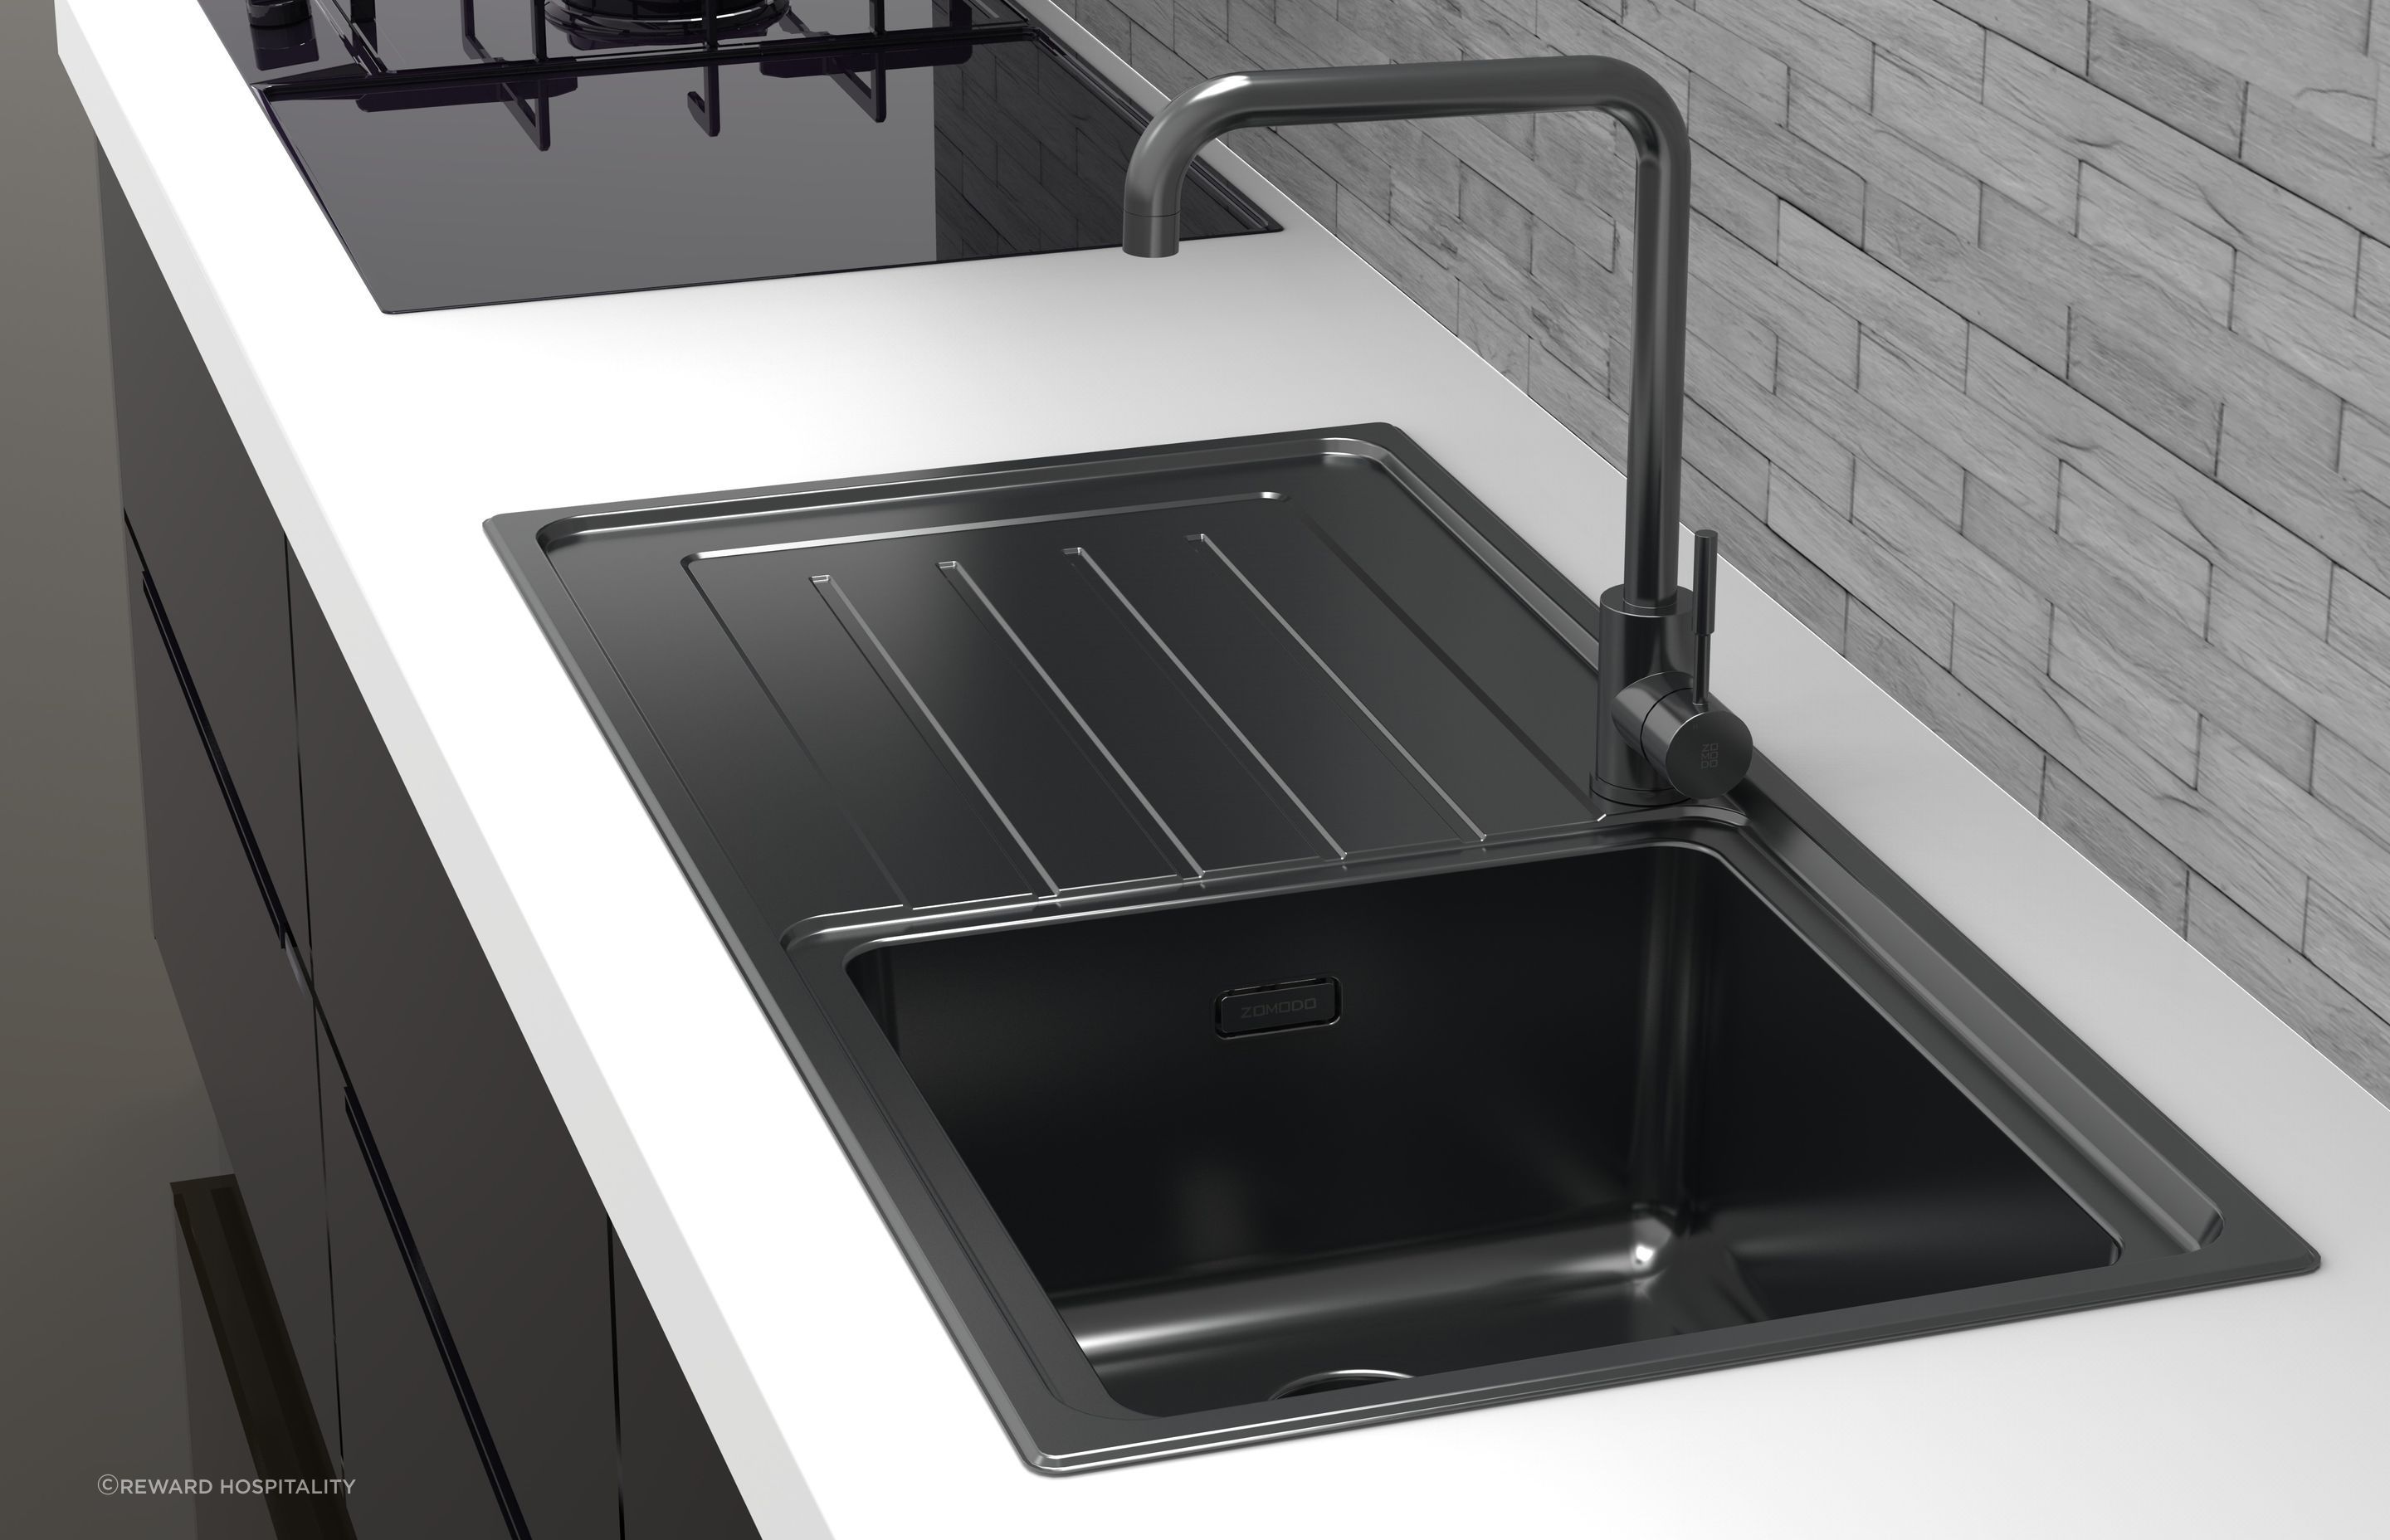 The ZOMODO Delta Black Sink and Drainer is an incredibly versatile choice for busy households.